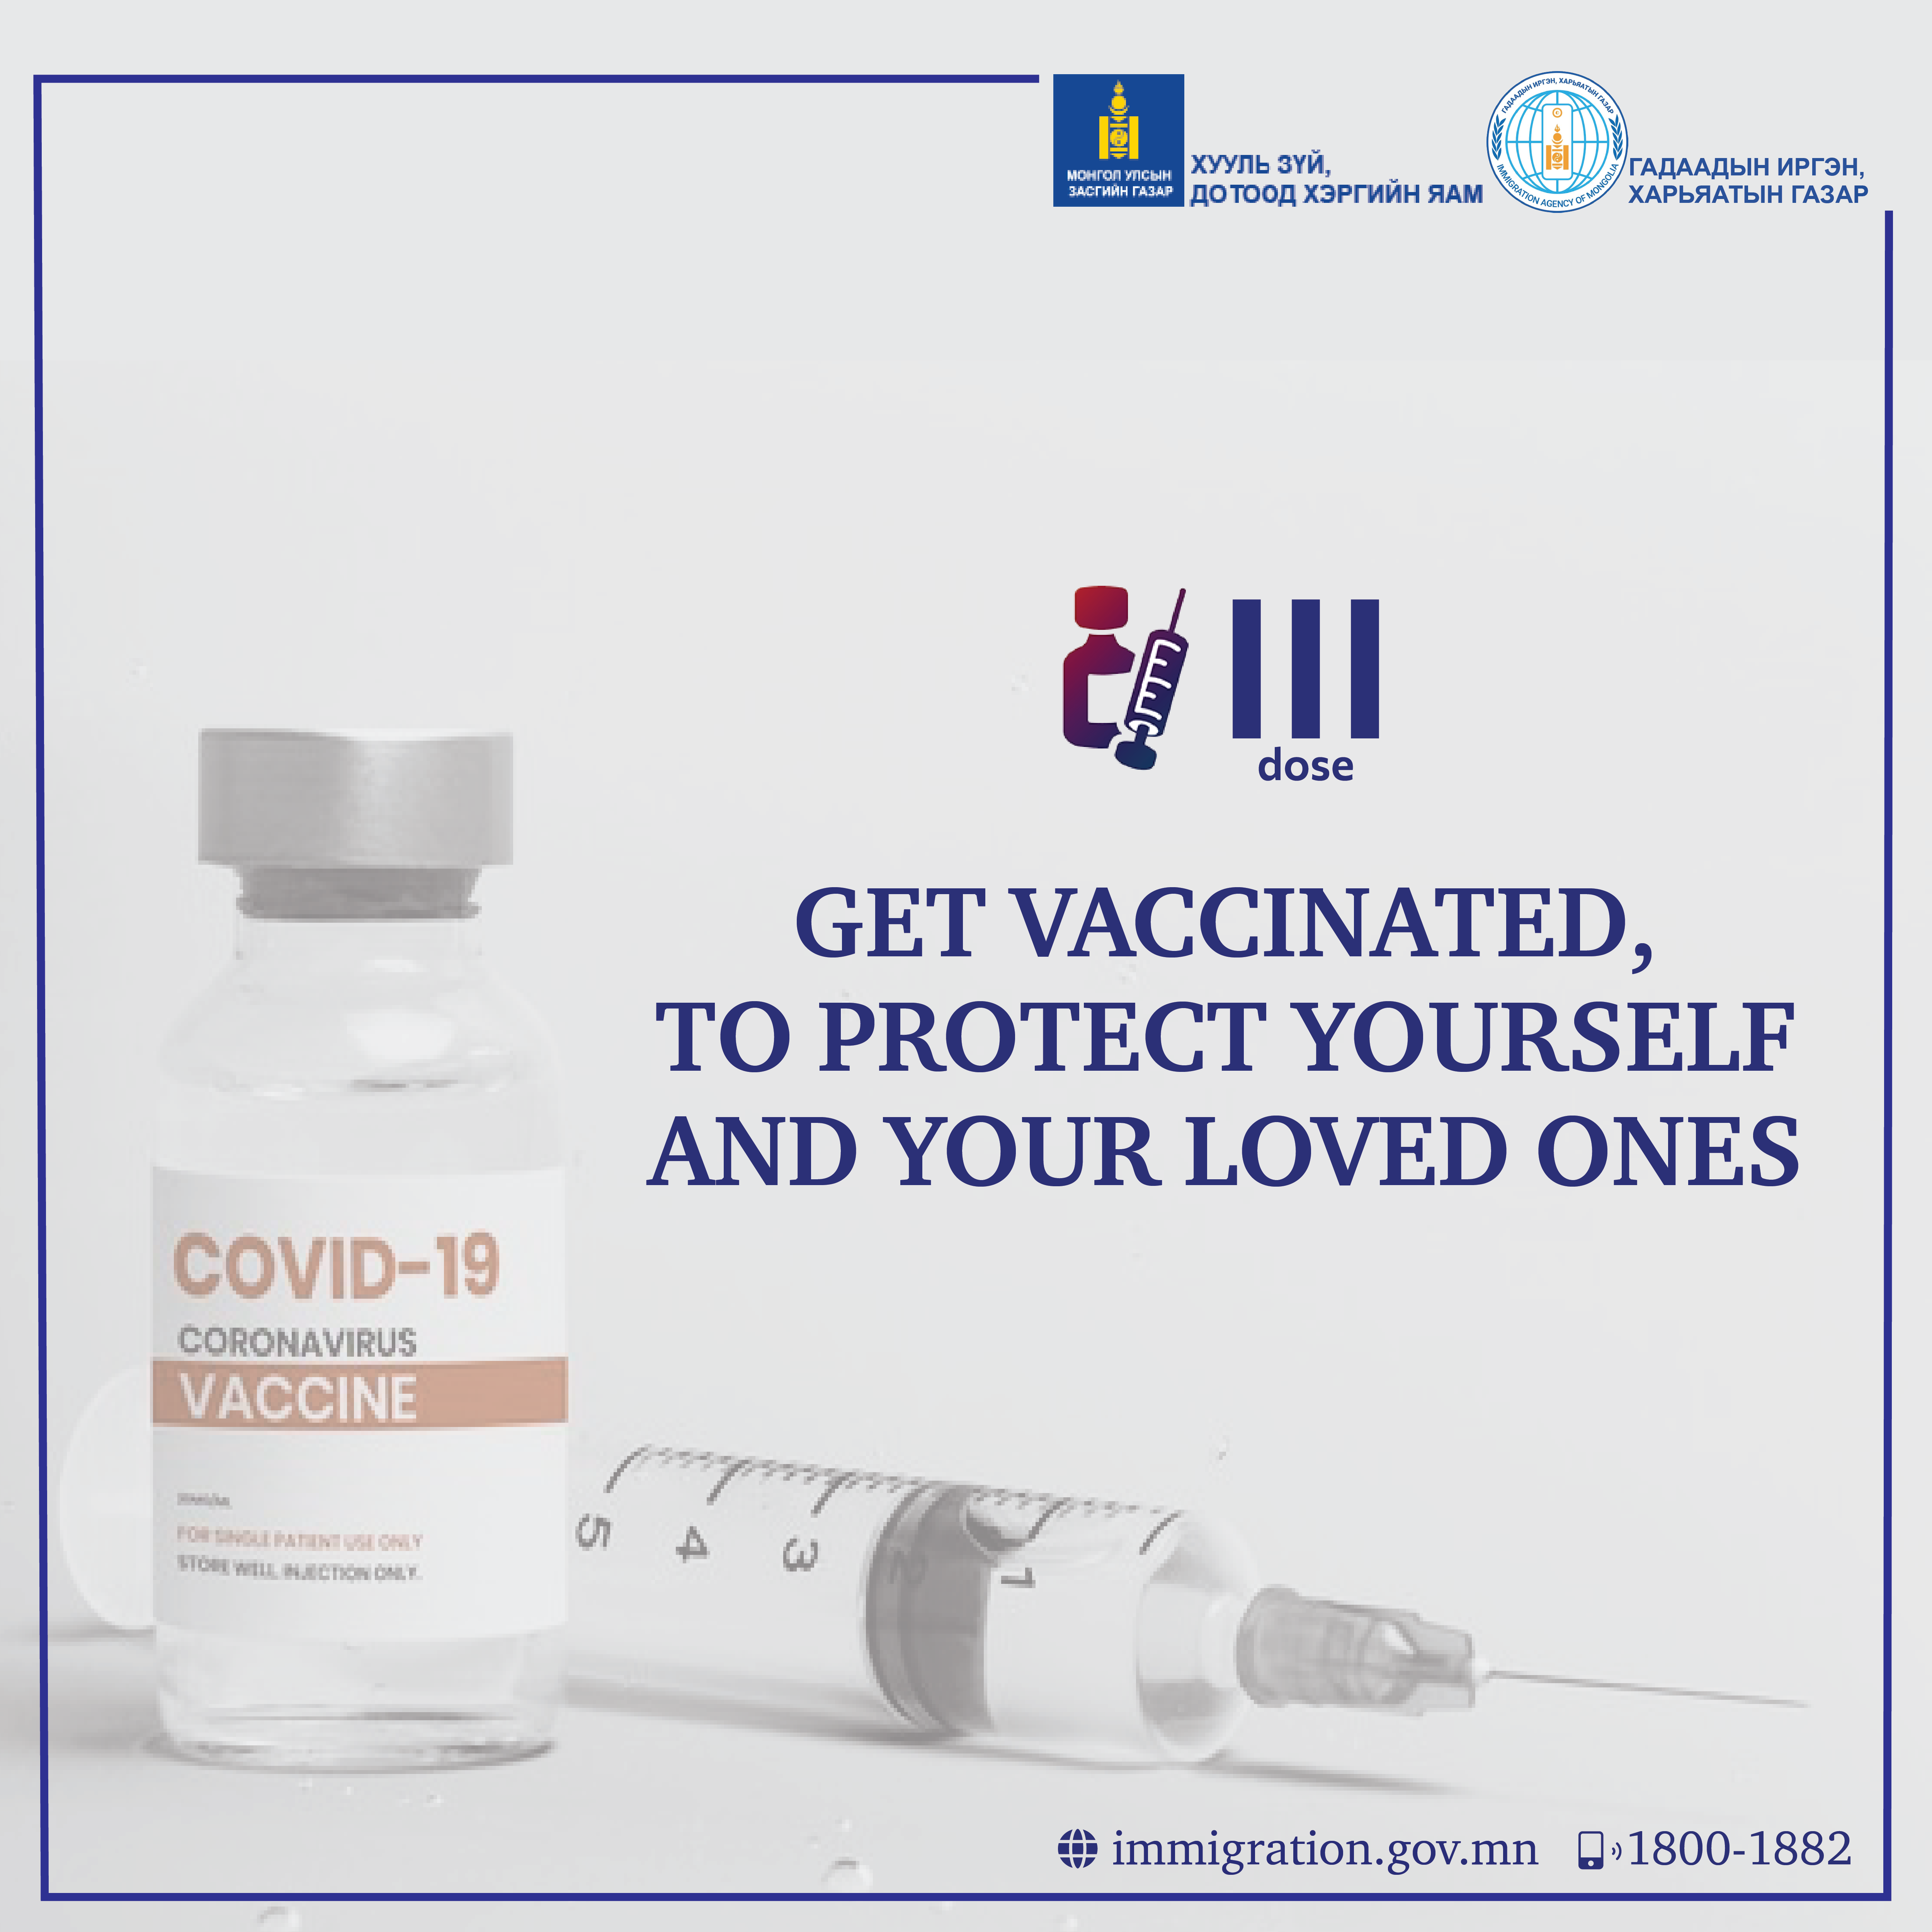 2470 foreigners have received a booster shot of COVID-19 vaccine